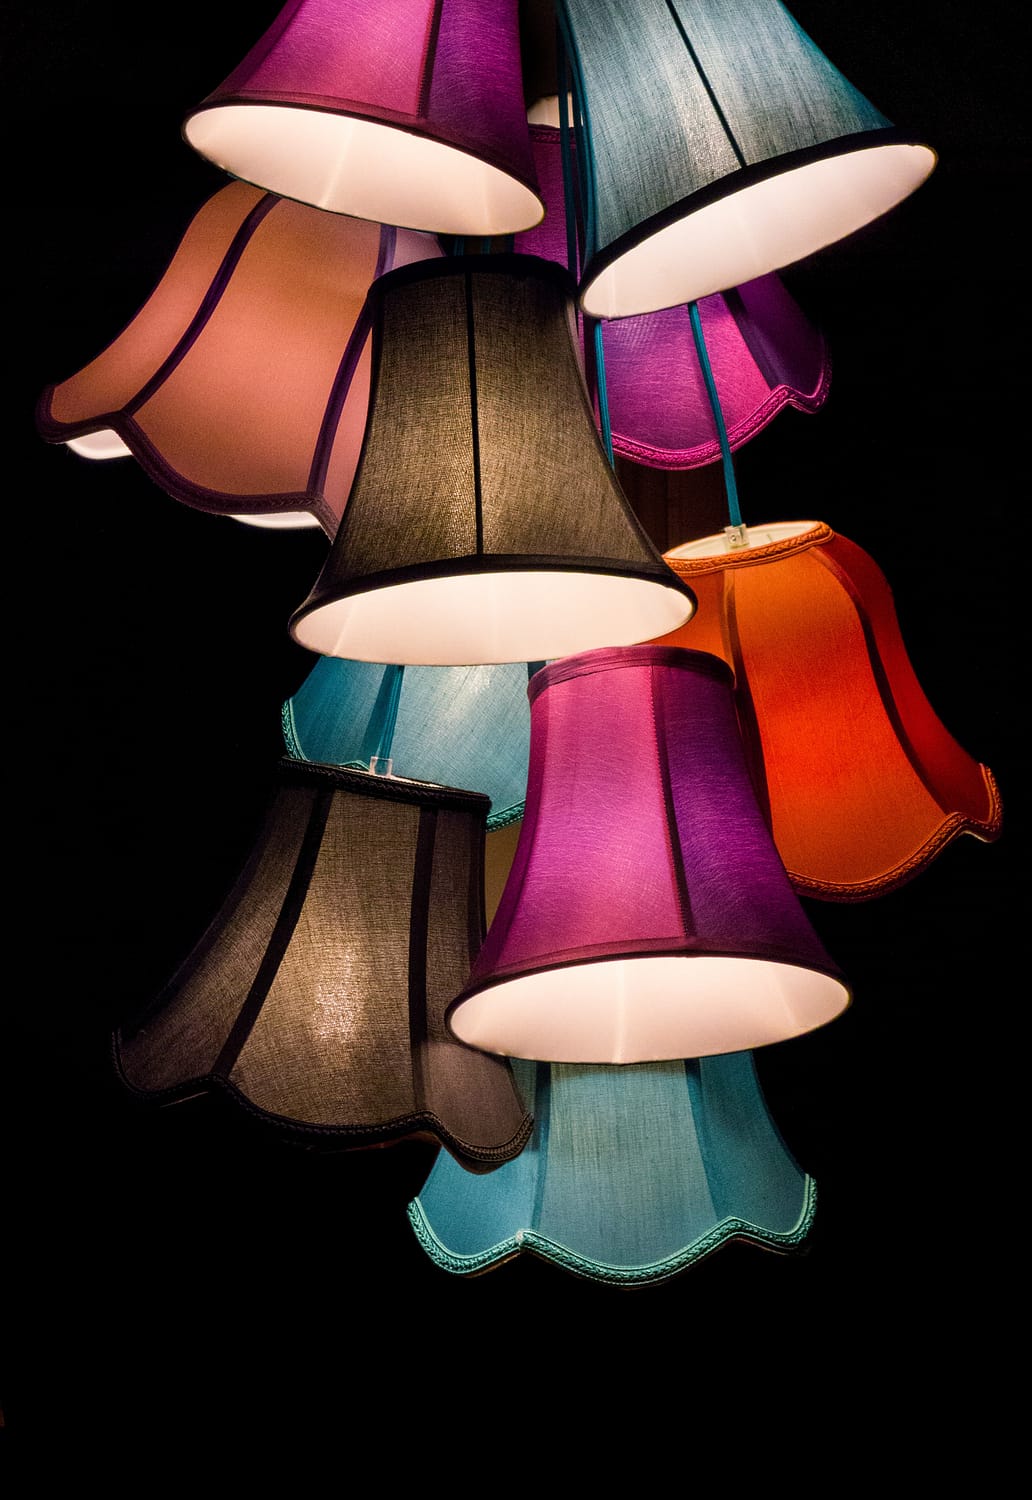 many lamps in different colors